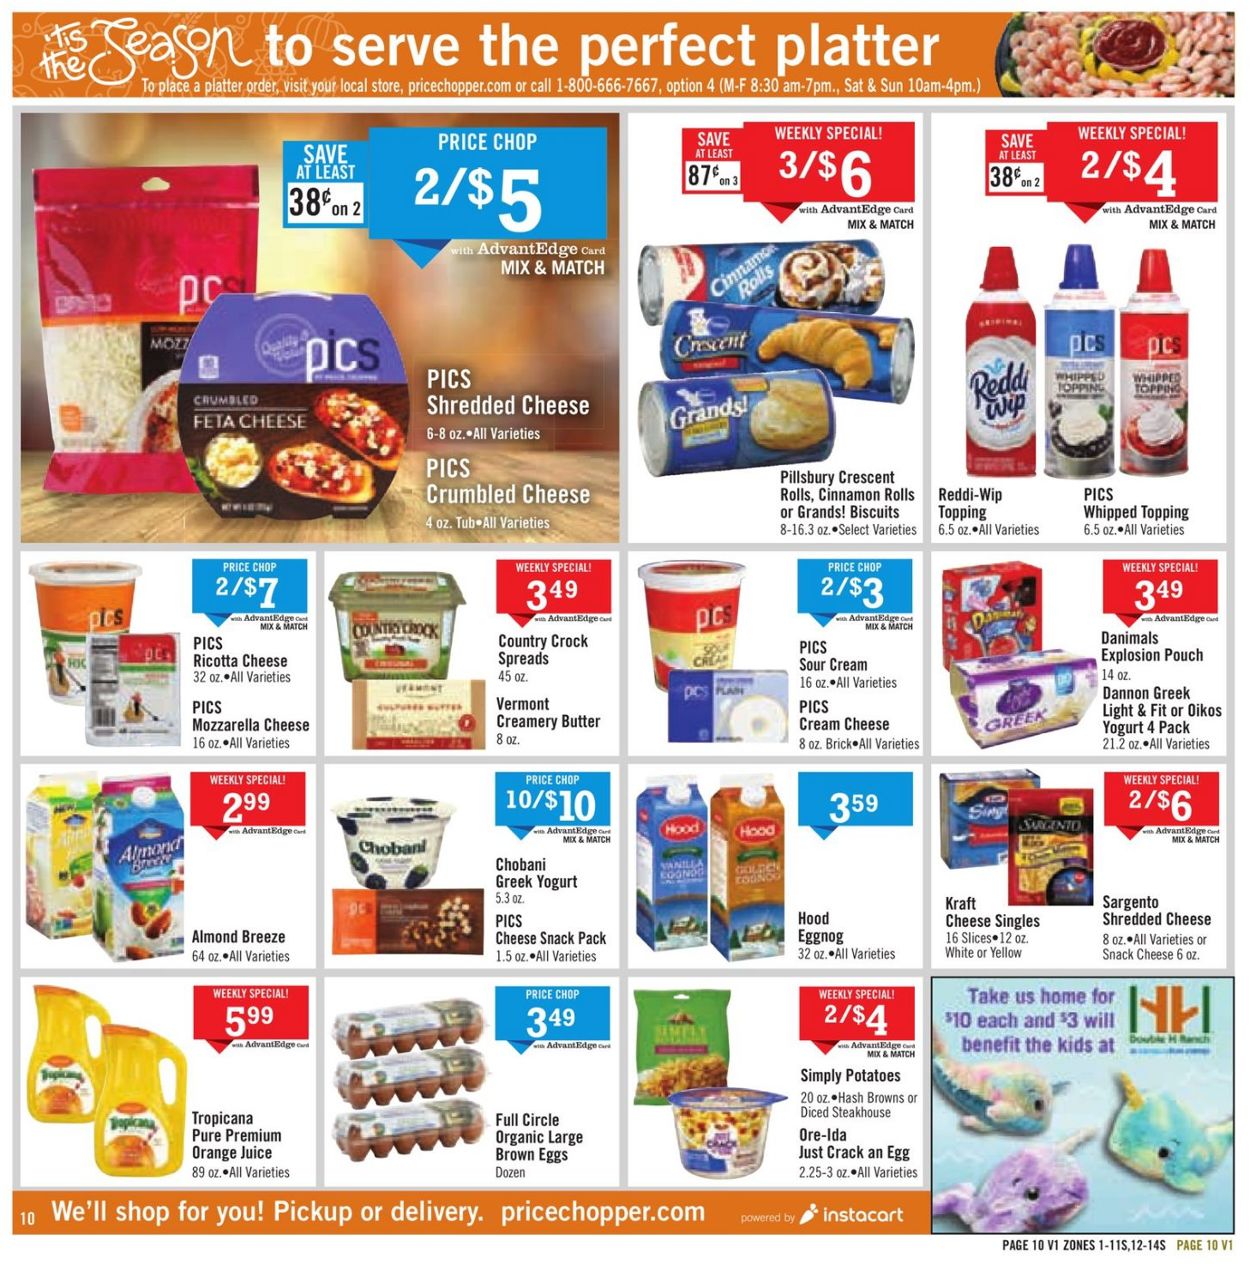 Price Chopper Current weekly ad 11/15 - 11/21/2020 14 - frequent-ads.com